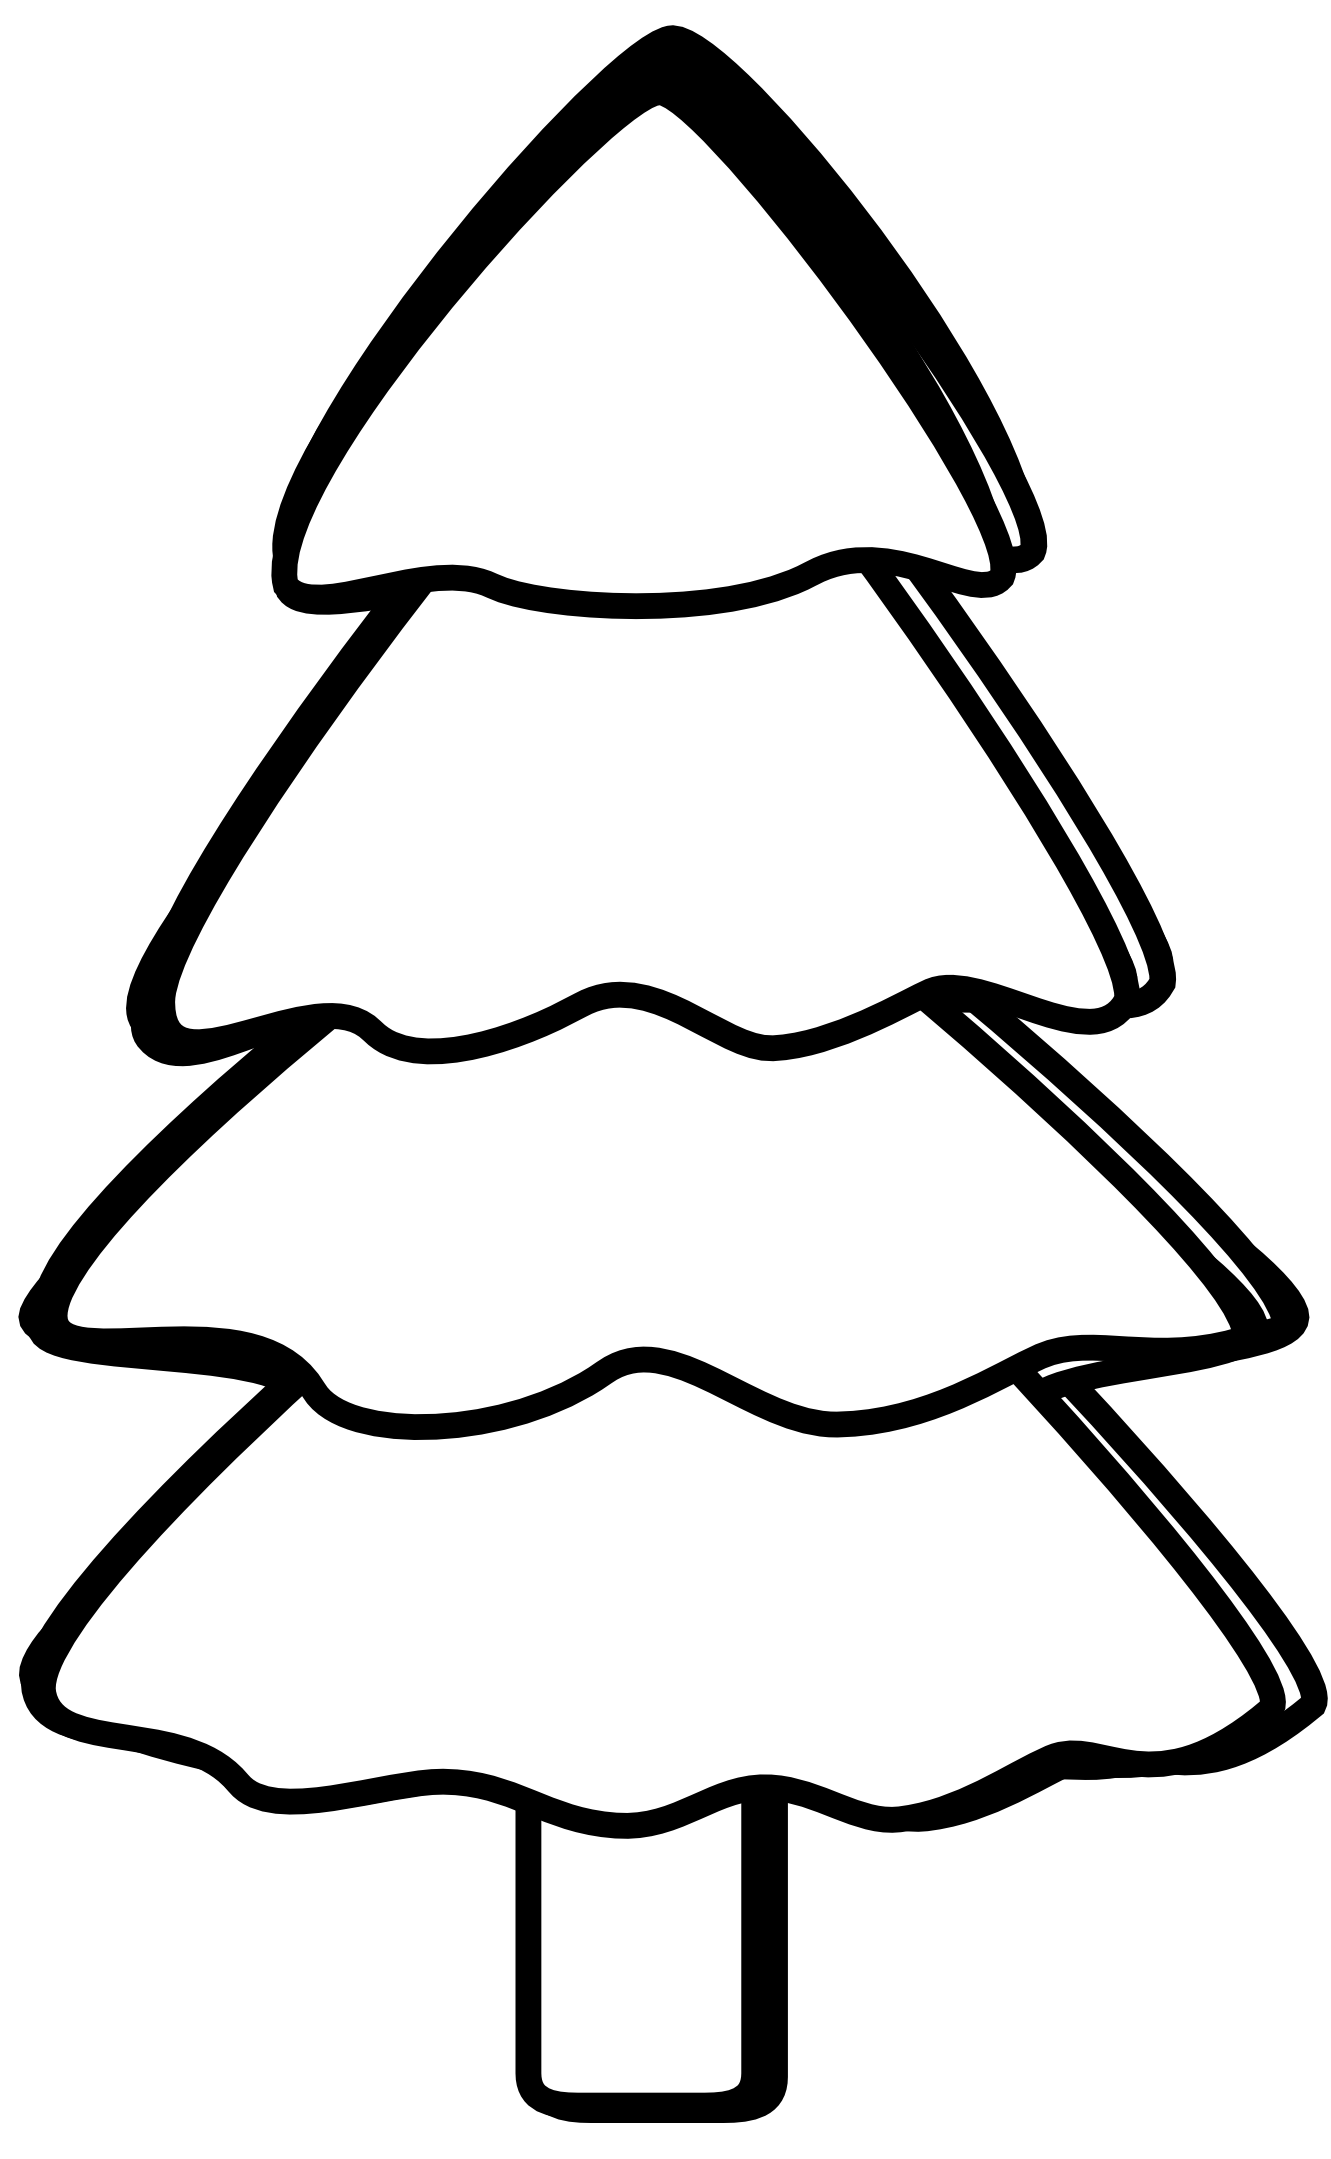 tree clipart black and white - Clip Art Library